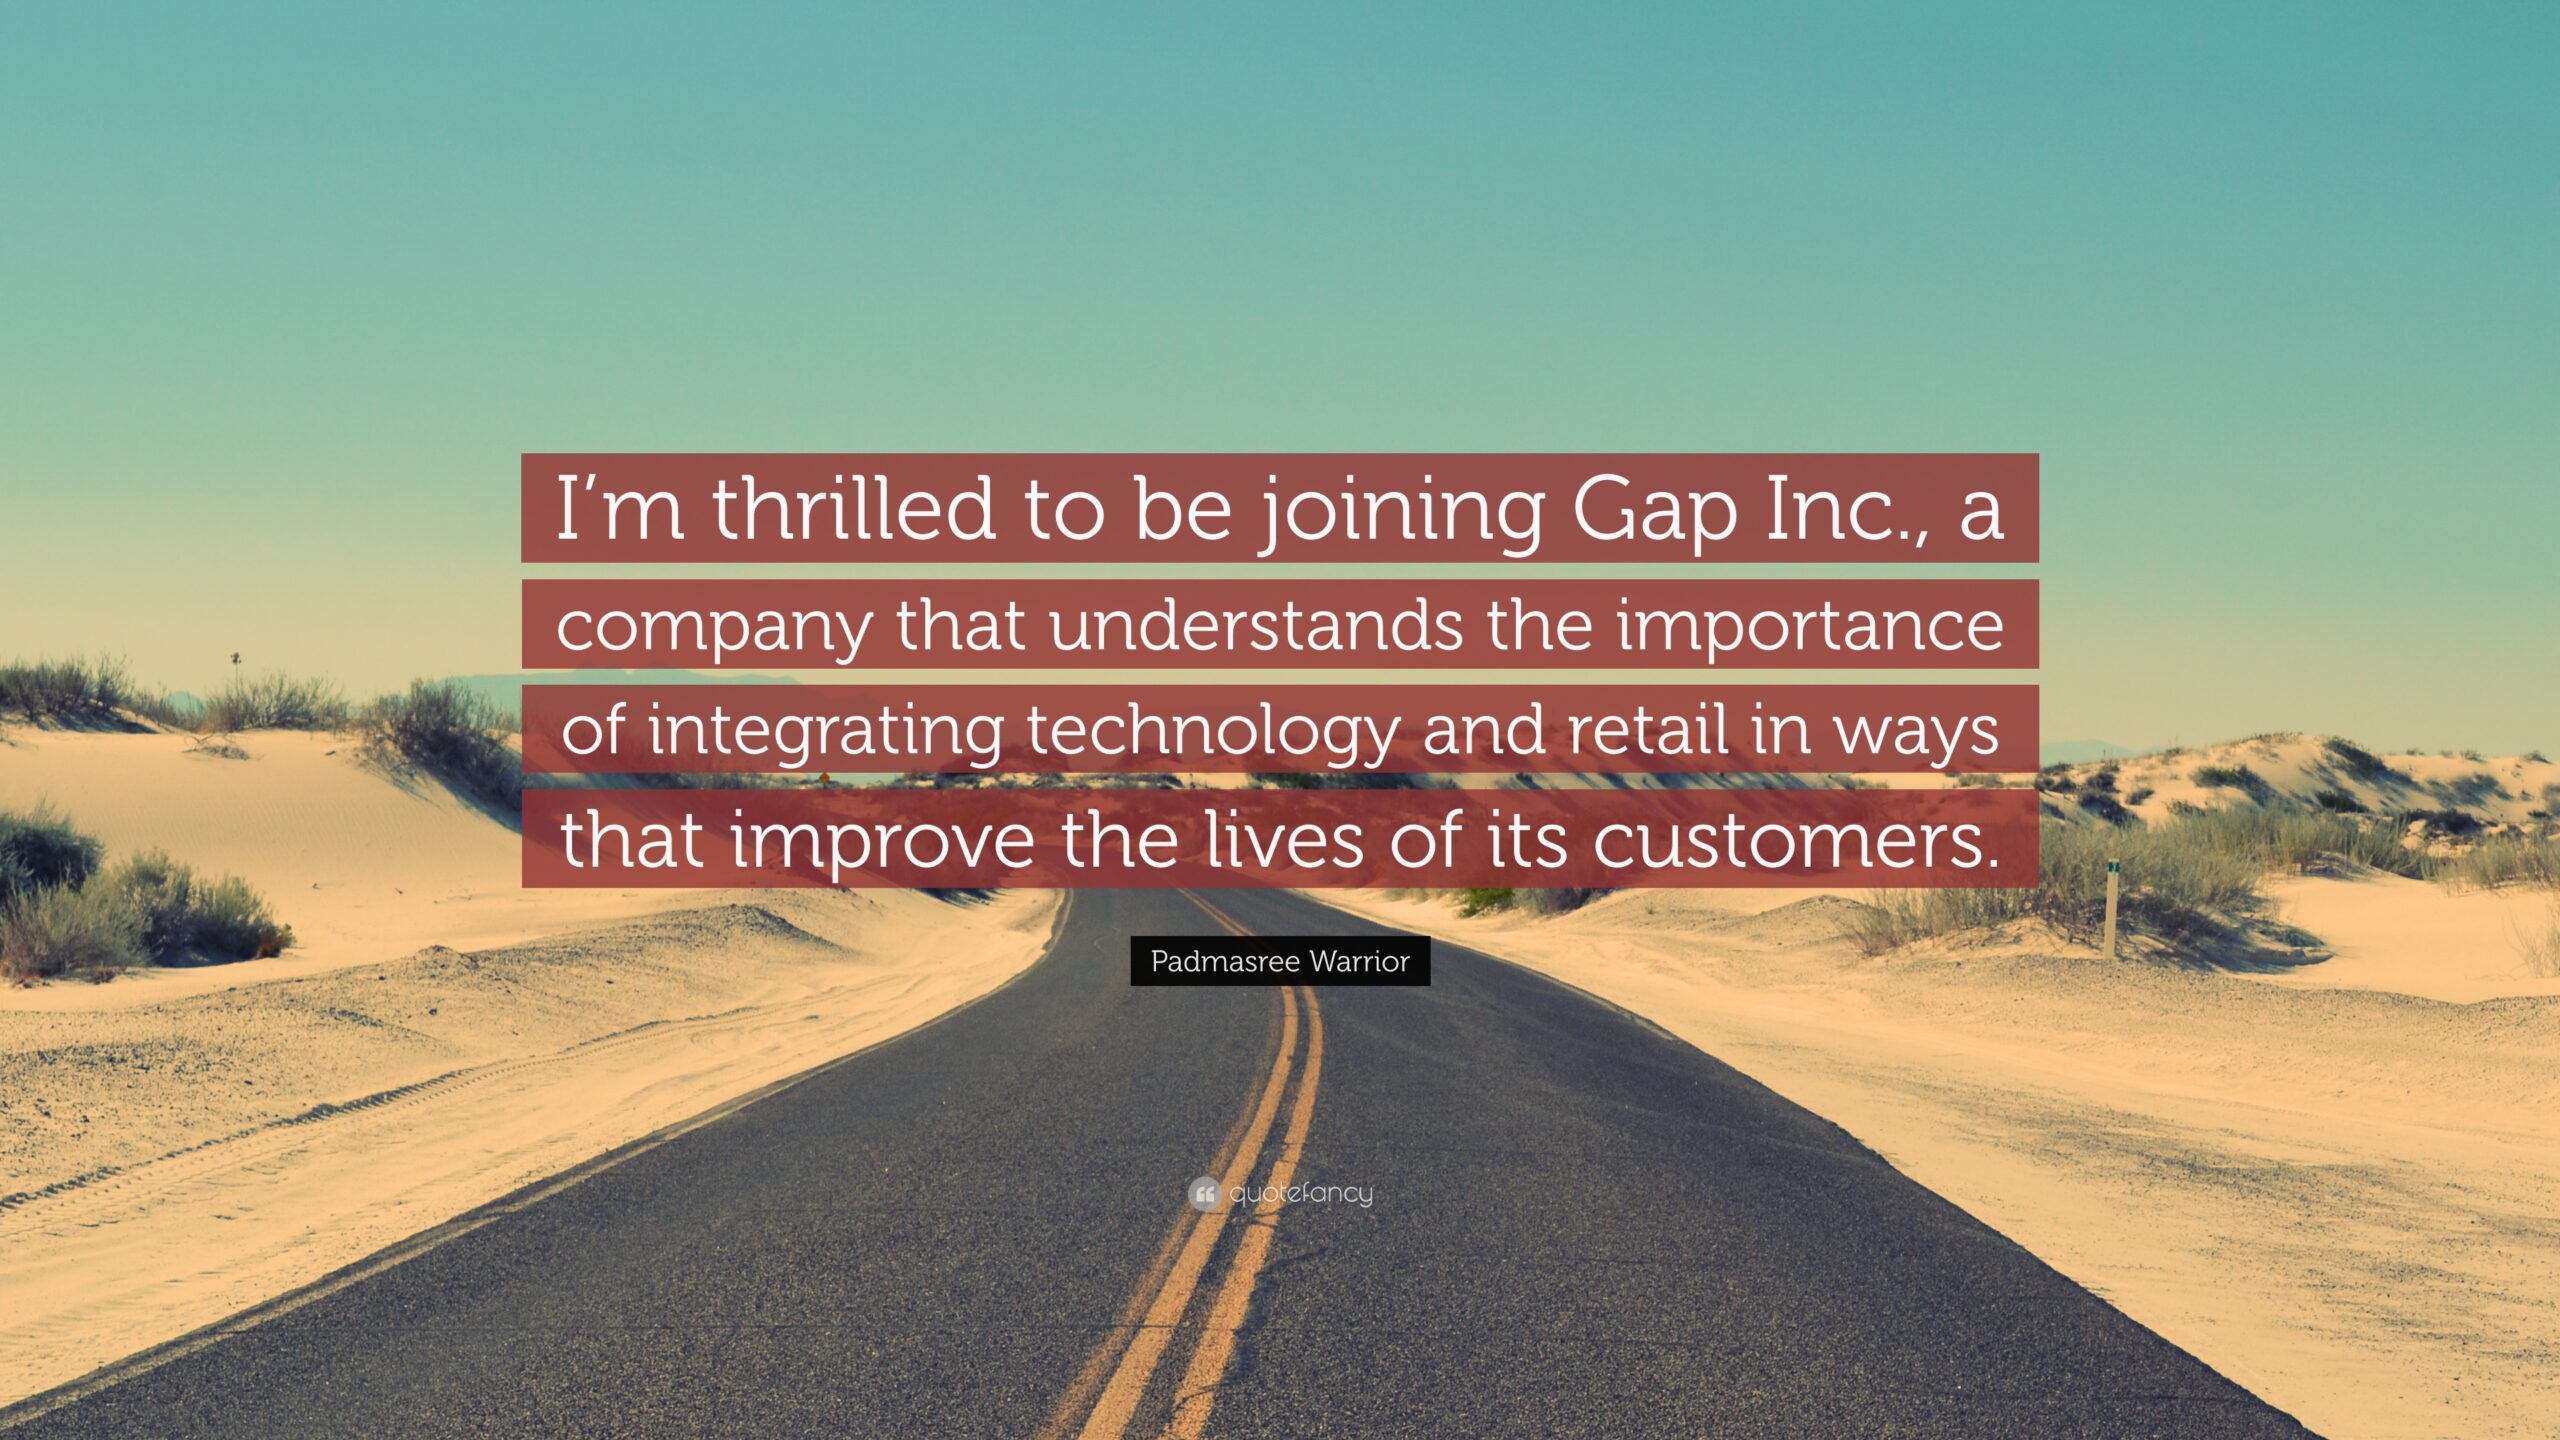 Padmasree Warrior Quote “I’m thrilled to be joining Gap Inc, a